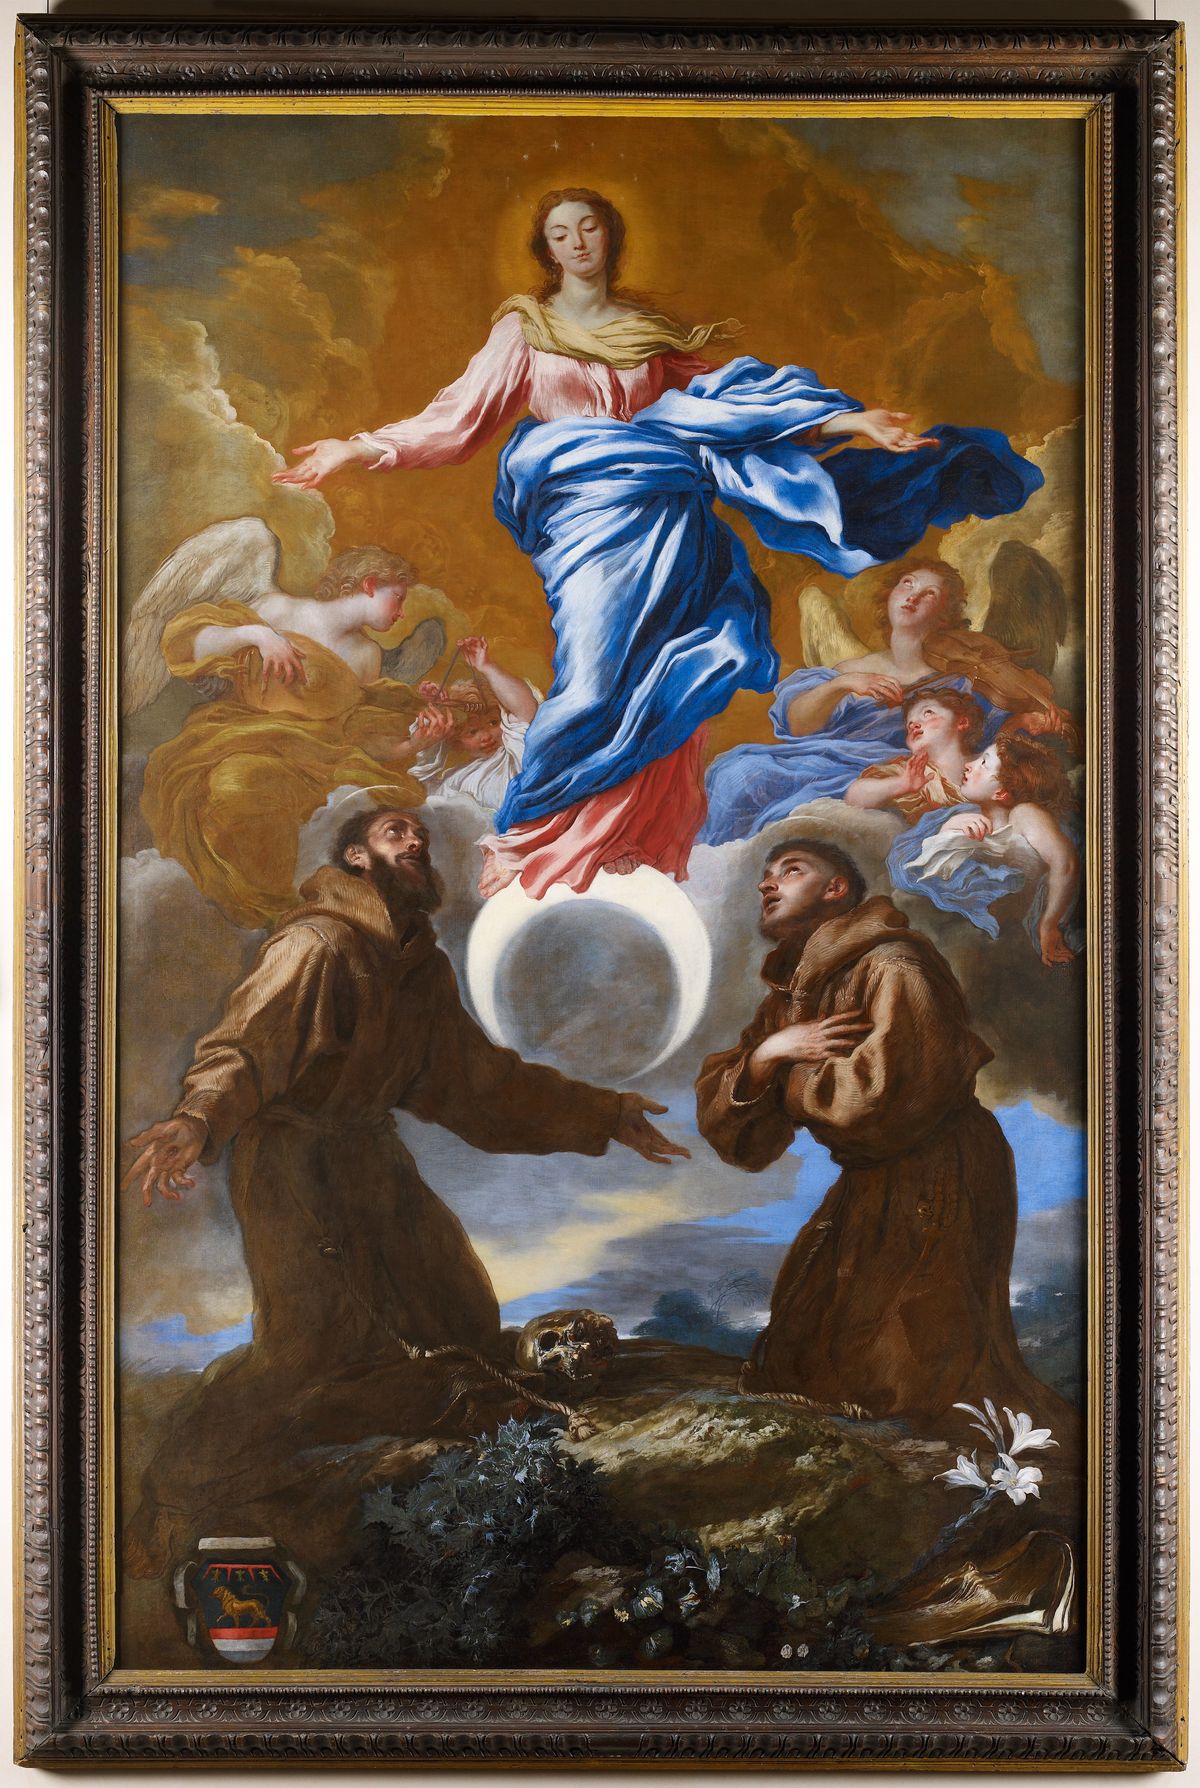 The Immaculate Conception with Saints Francis of Assisi and Anthony of Padua by Giovanni Benedetto Castiglione (1649–1650) - Public Domain Catholic Painting